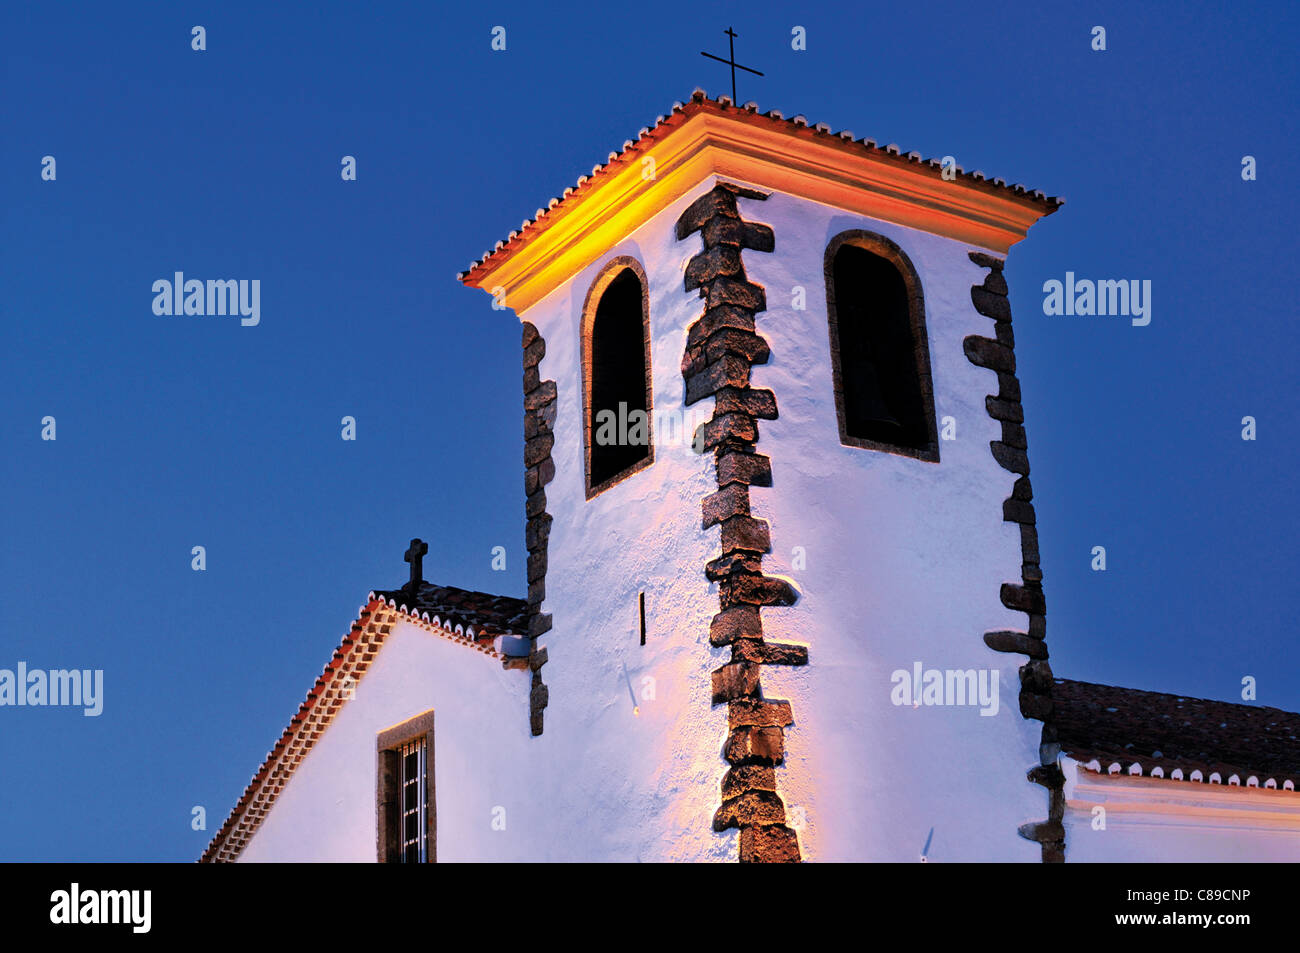 Portugal, Alentejo: Nocturnal illuminated church and museum of Santa Maria in the historic village of Marvao Stock Photo